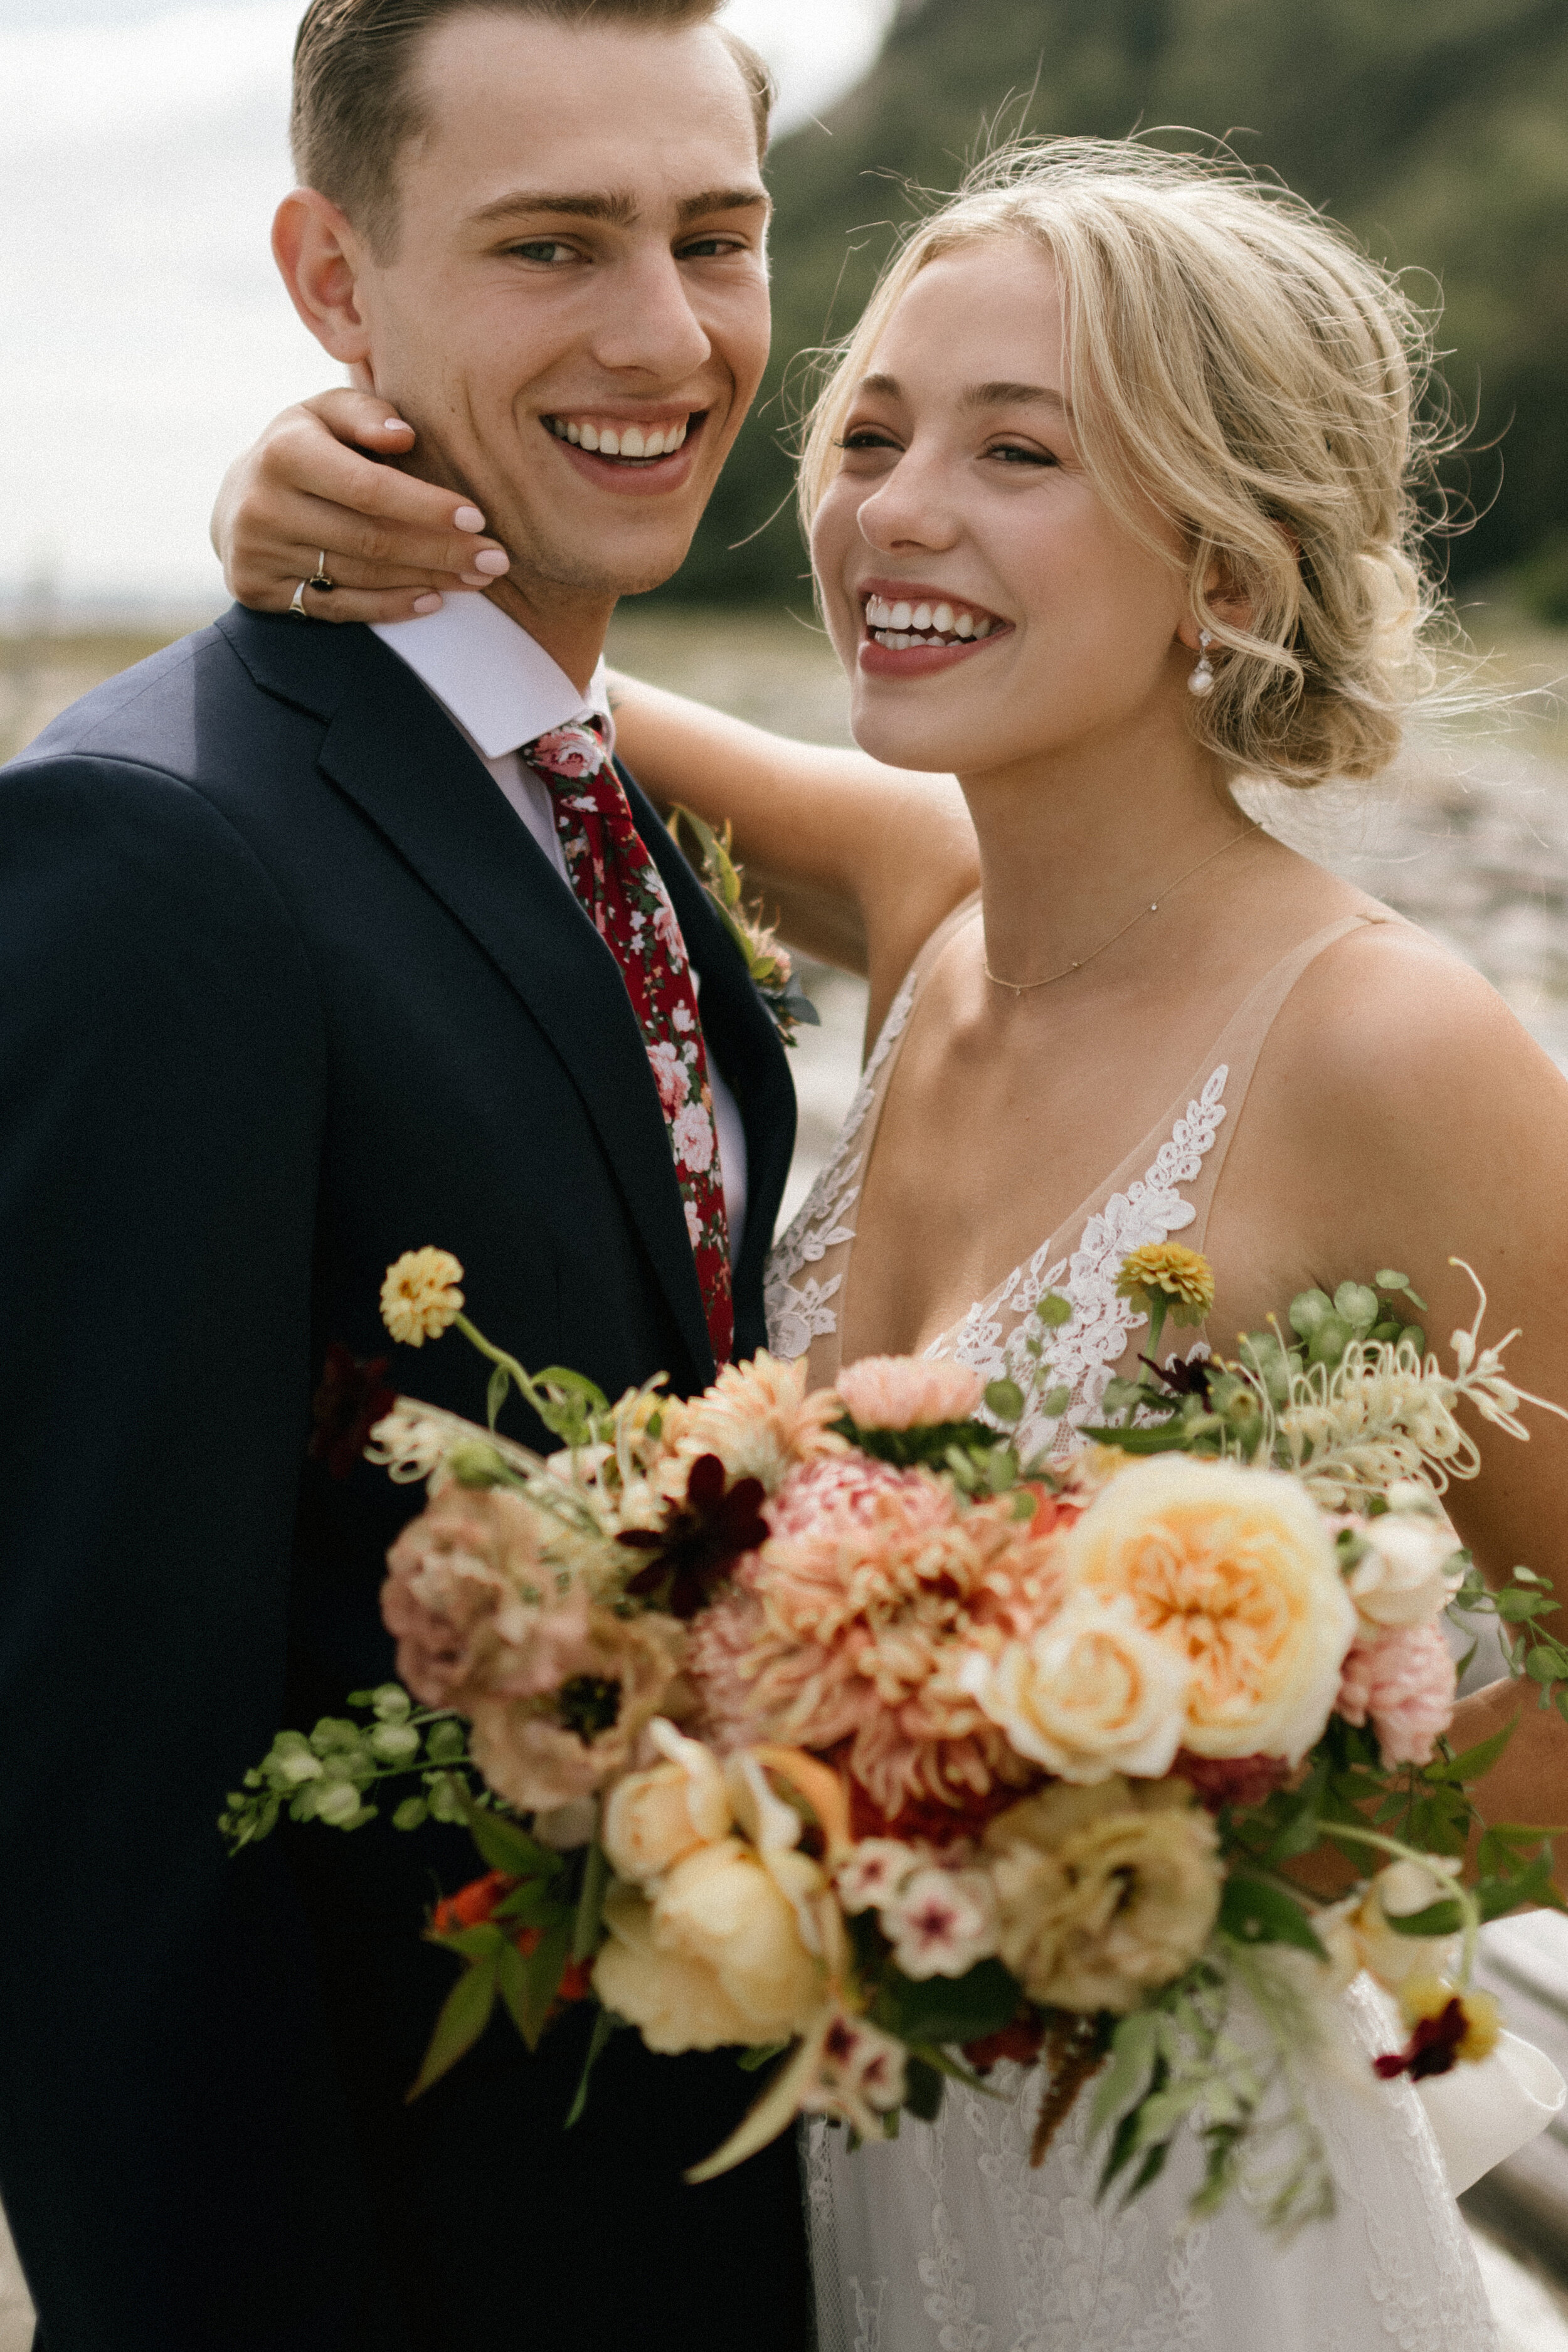 tobey - Whidbey Island backyard wedding flowers by Tobey Nelson Events image by Carina Skrobecki Photography (9).jpg